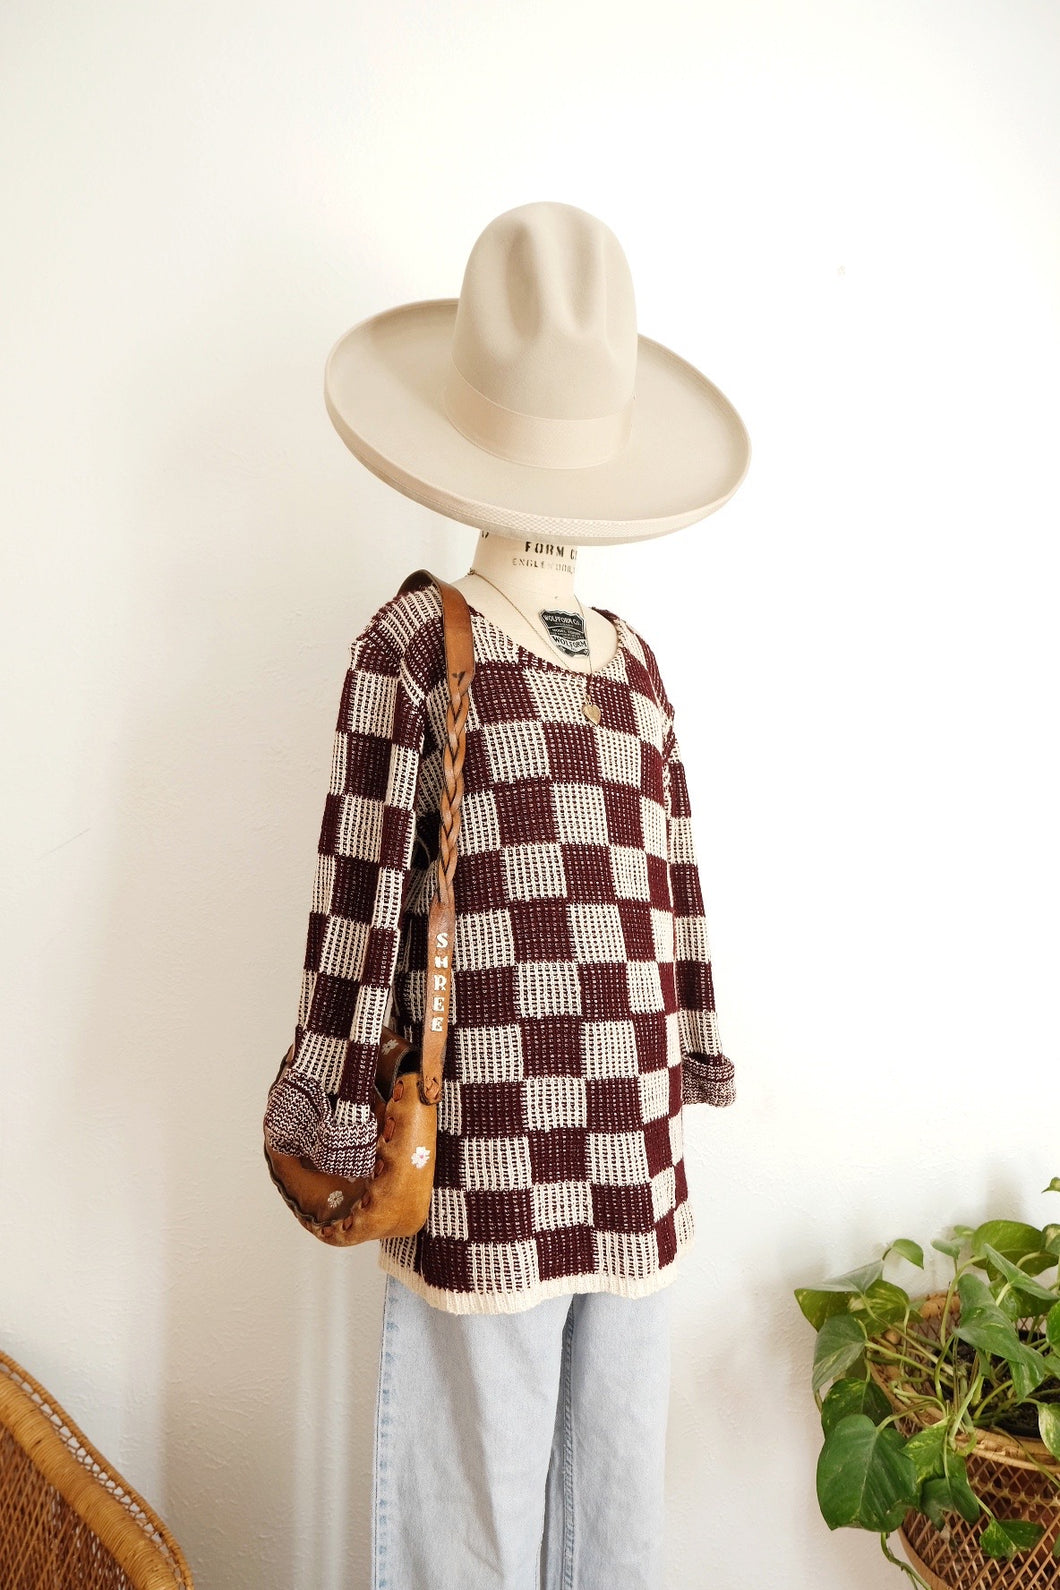 Vintage knit checkered sweater